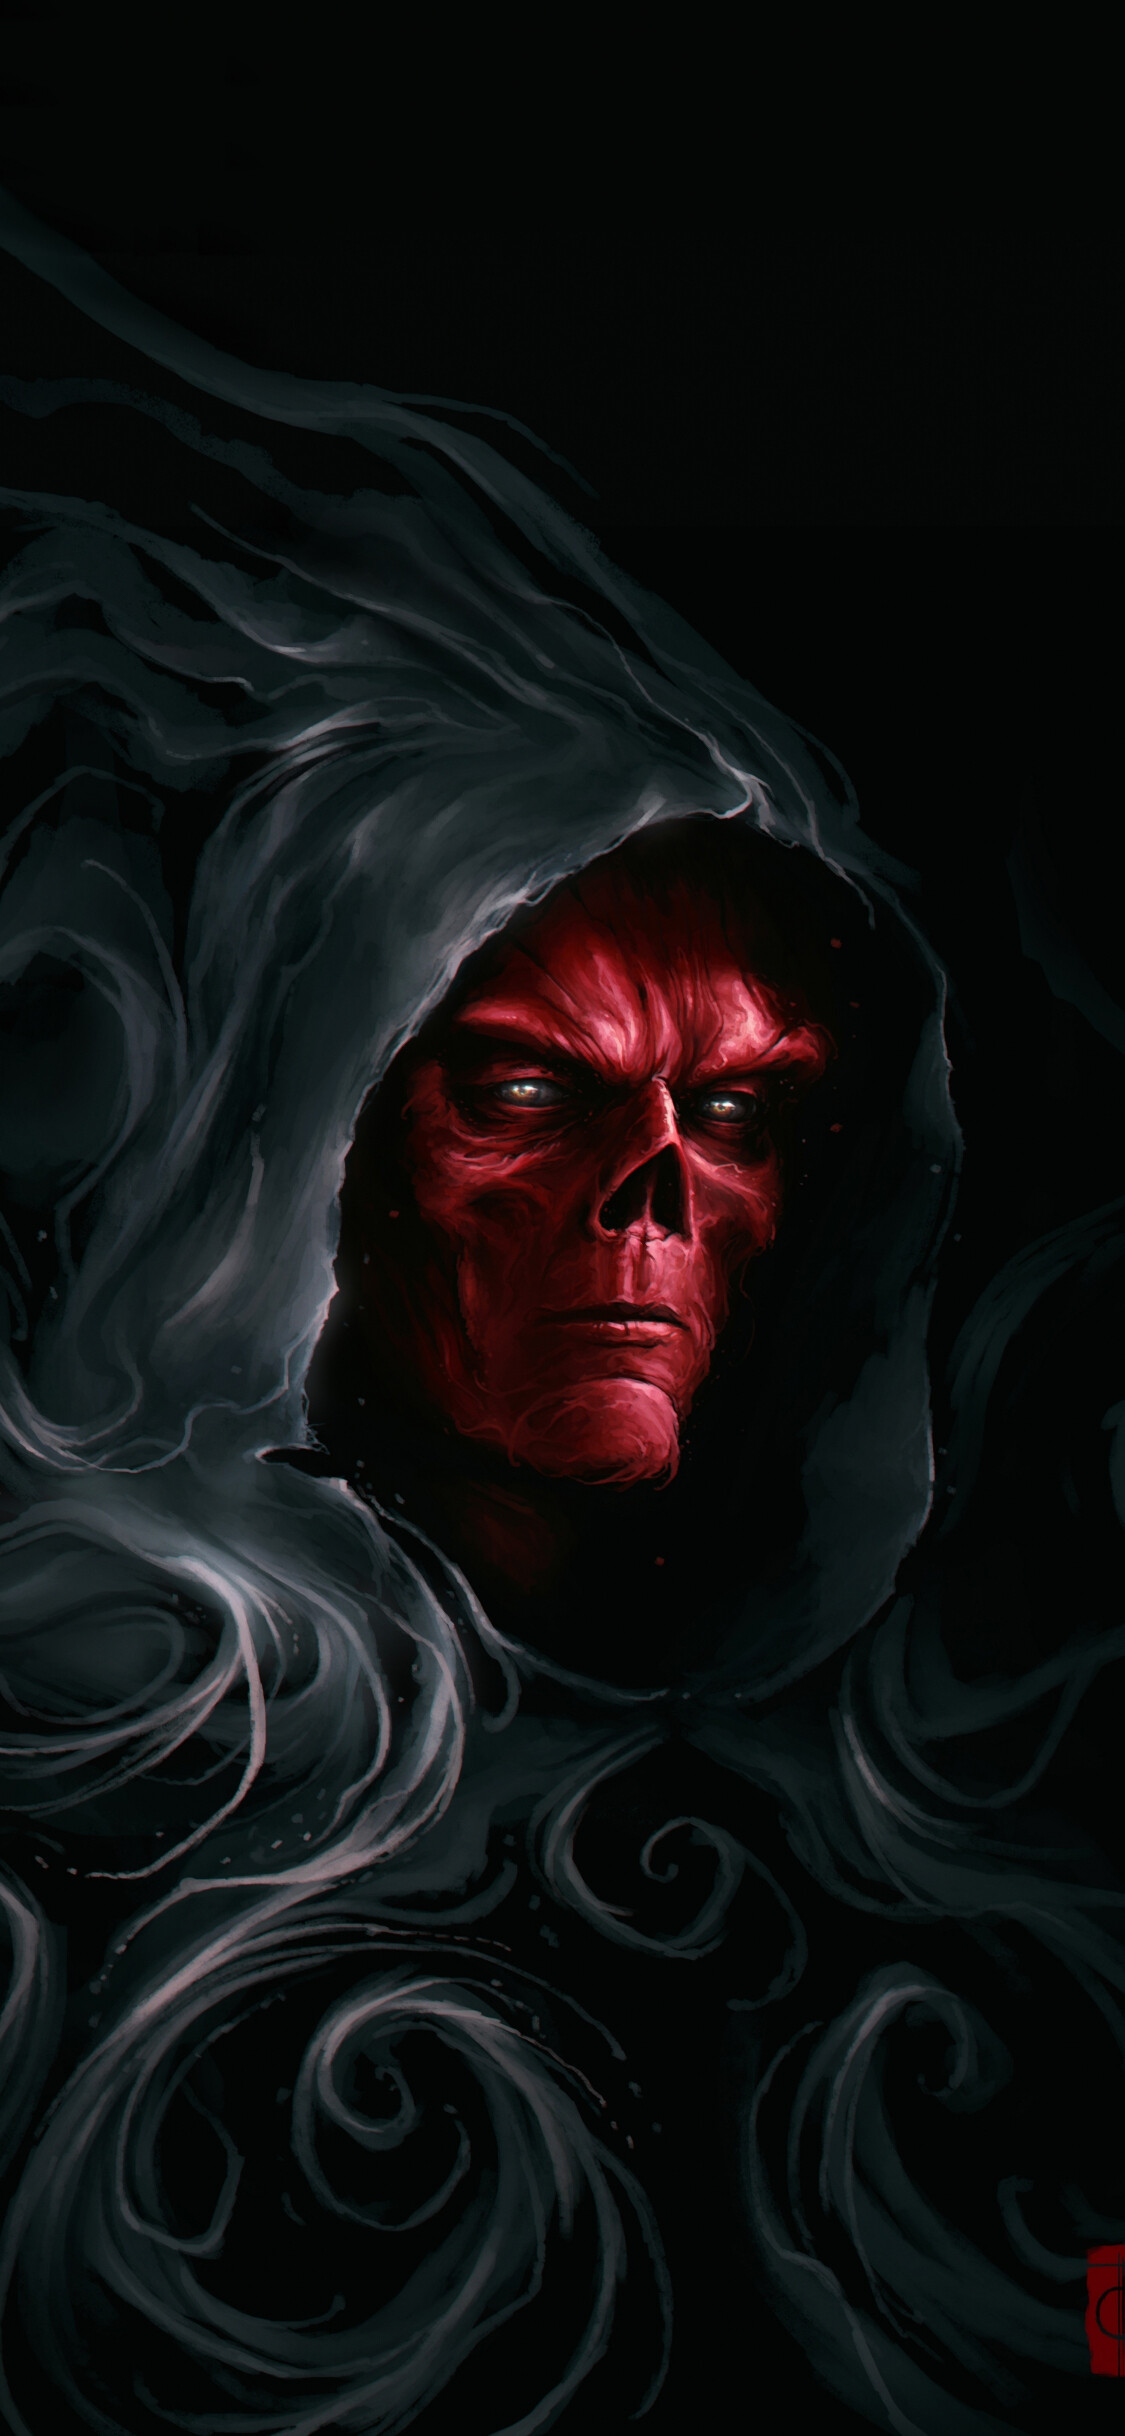 Marvel Villain: The Red Skull, An alias used by several supervillains appearing in American comic books. 1130x2440 HD Background.